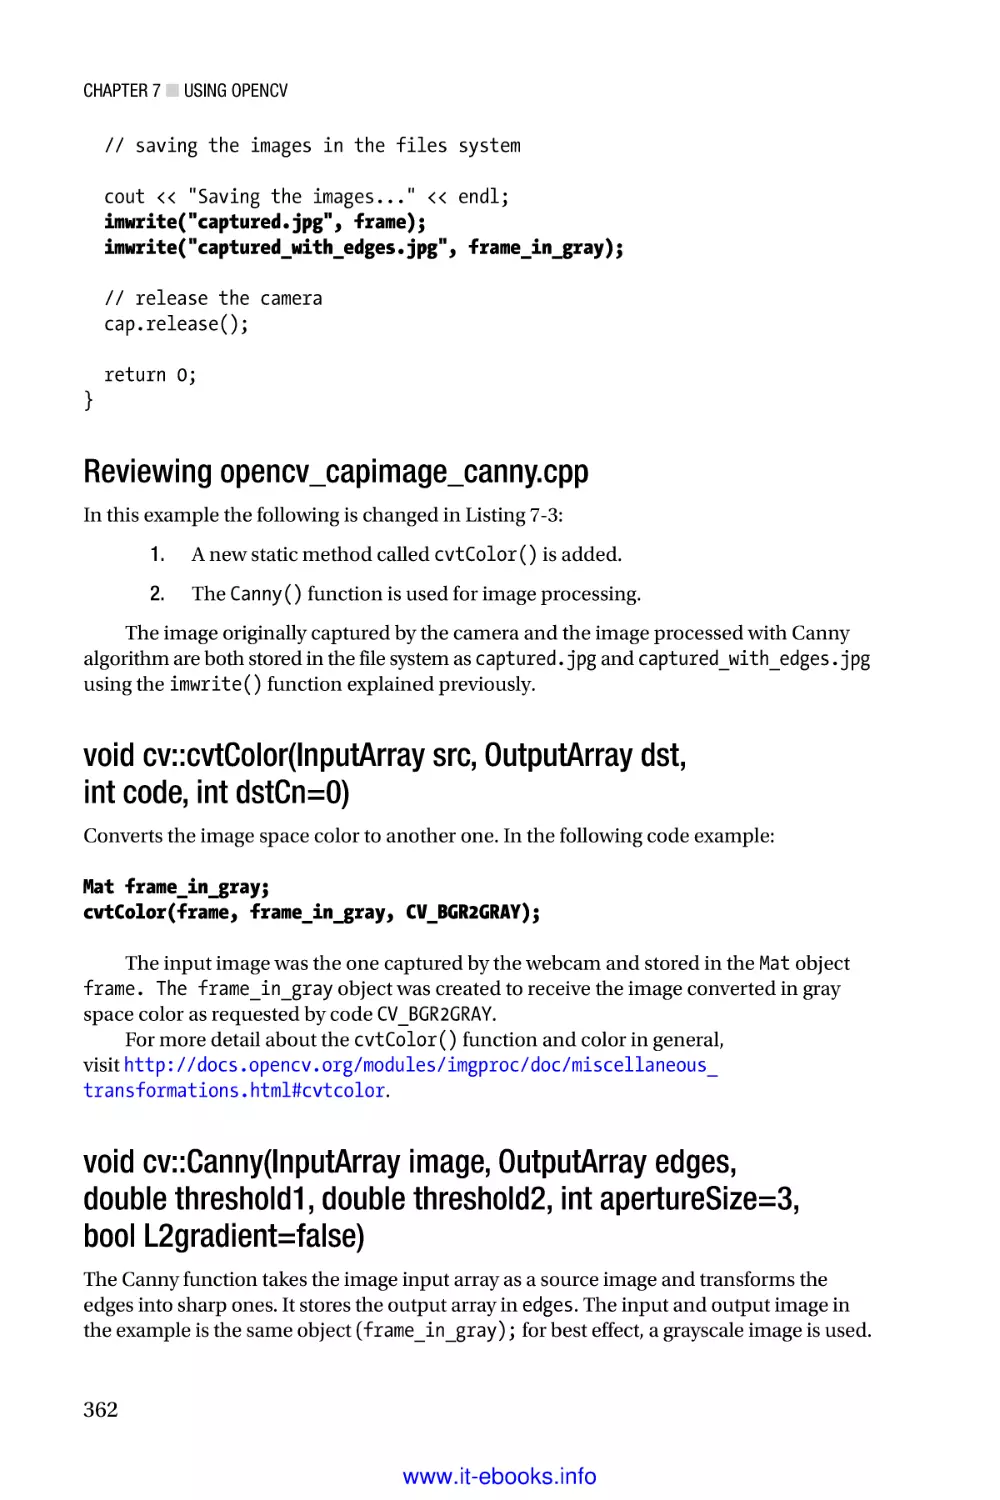 Reviewing opencv_capimage_canny.cpp
void cv
void cv